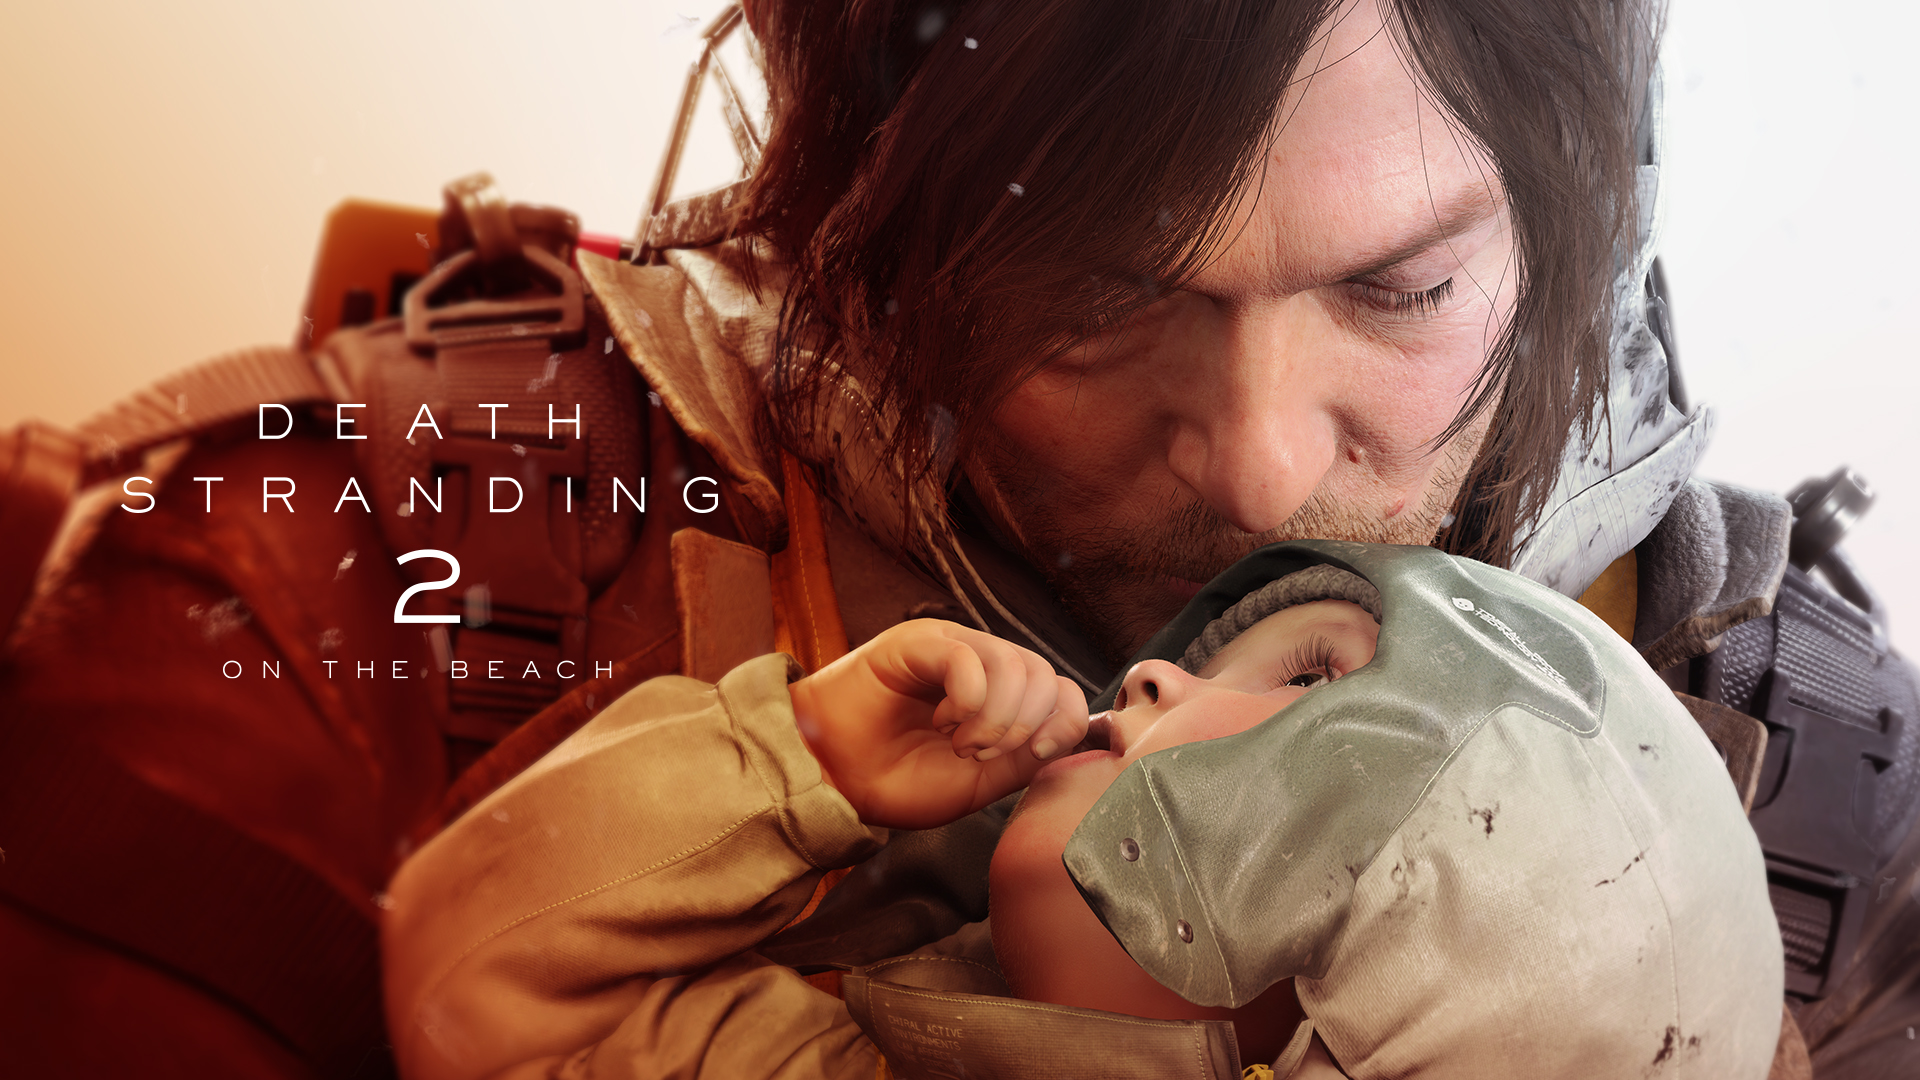 Death Stranding 2 New Trailer Revealed 2025 Launch Date, Gameplay and More